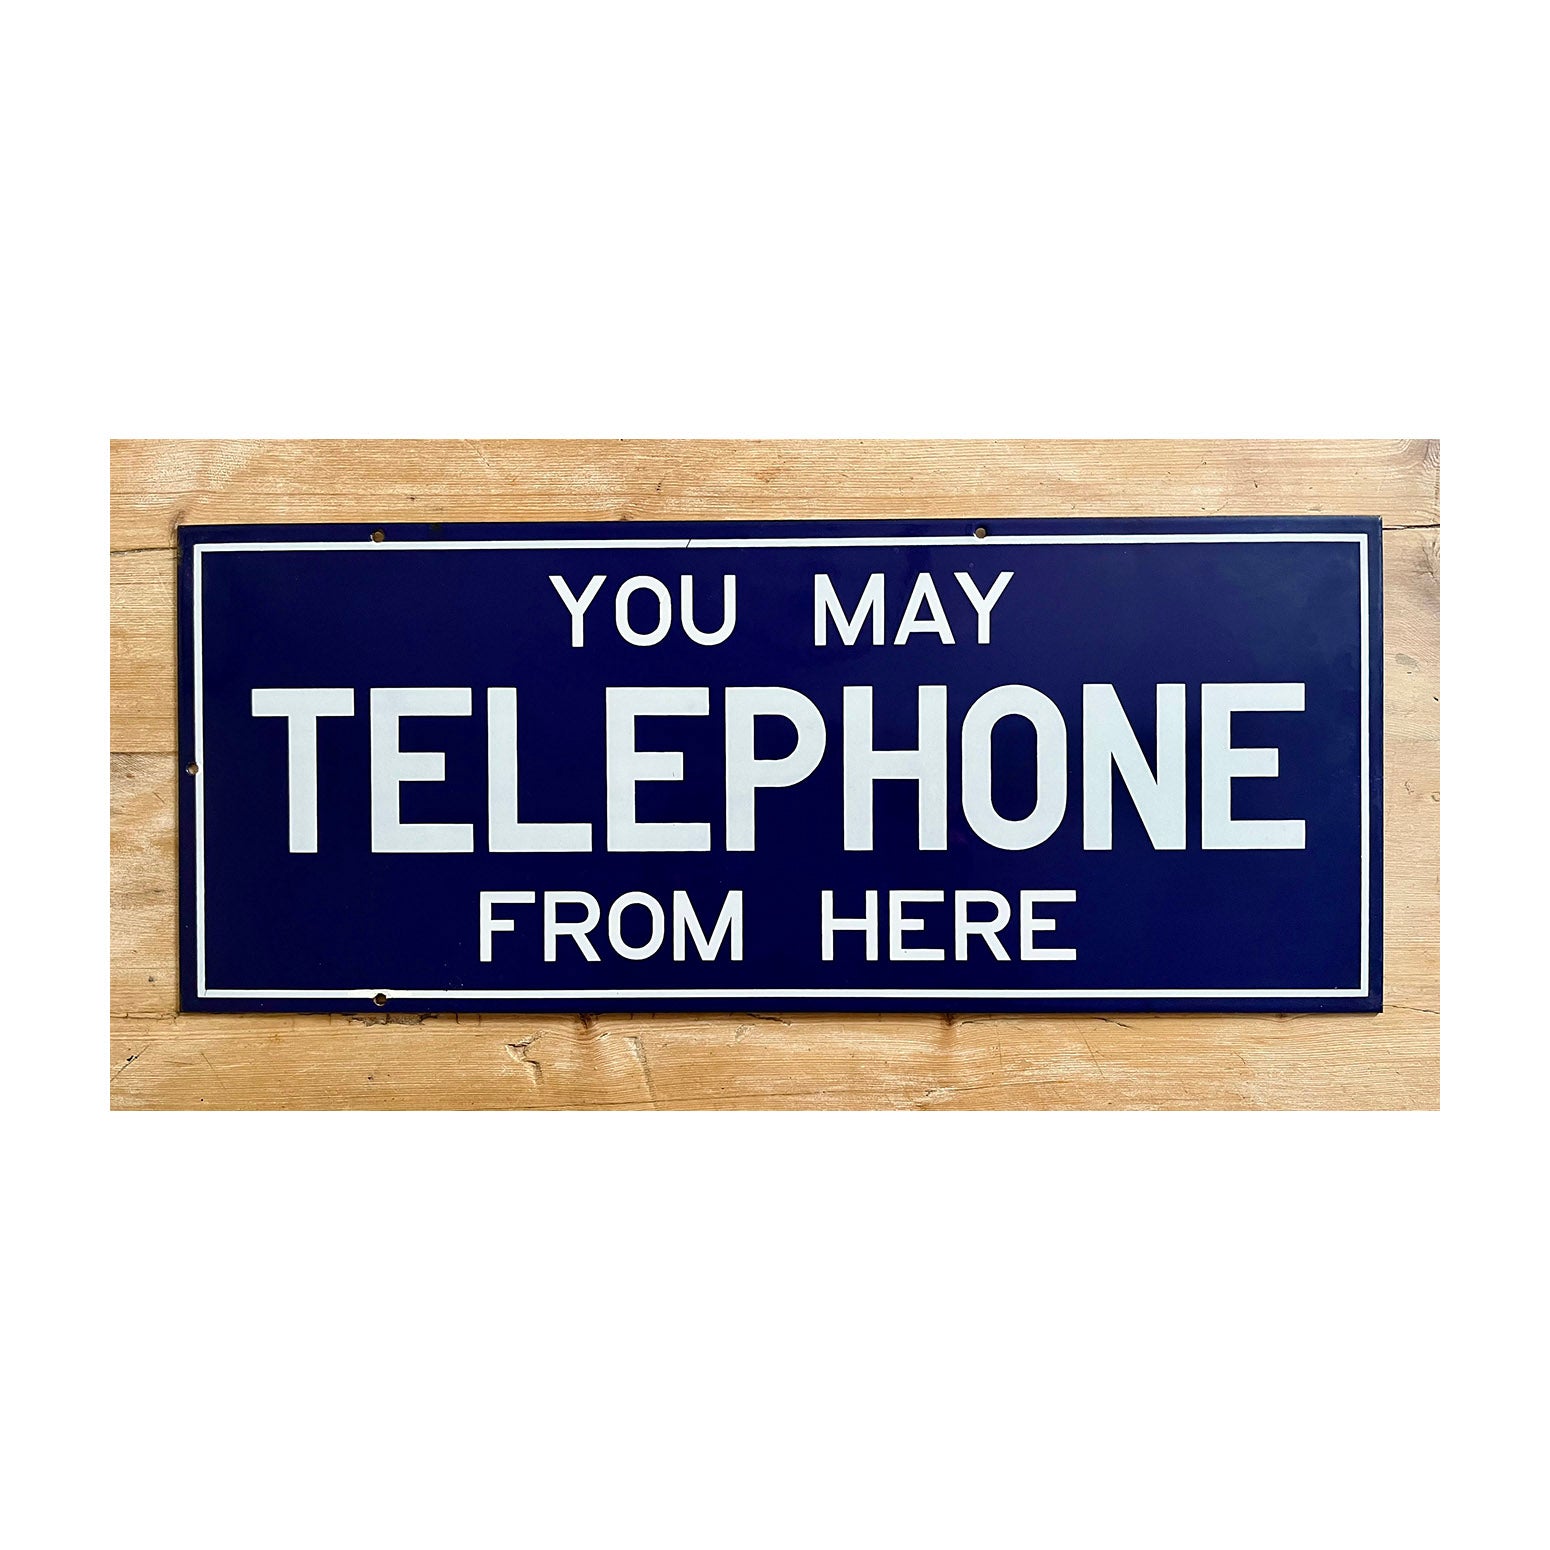 original mid-century double sided enamel sign 'You May Telephone From Here'. White on dark blue